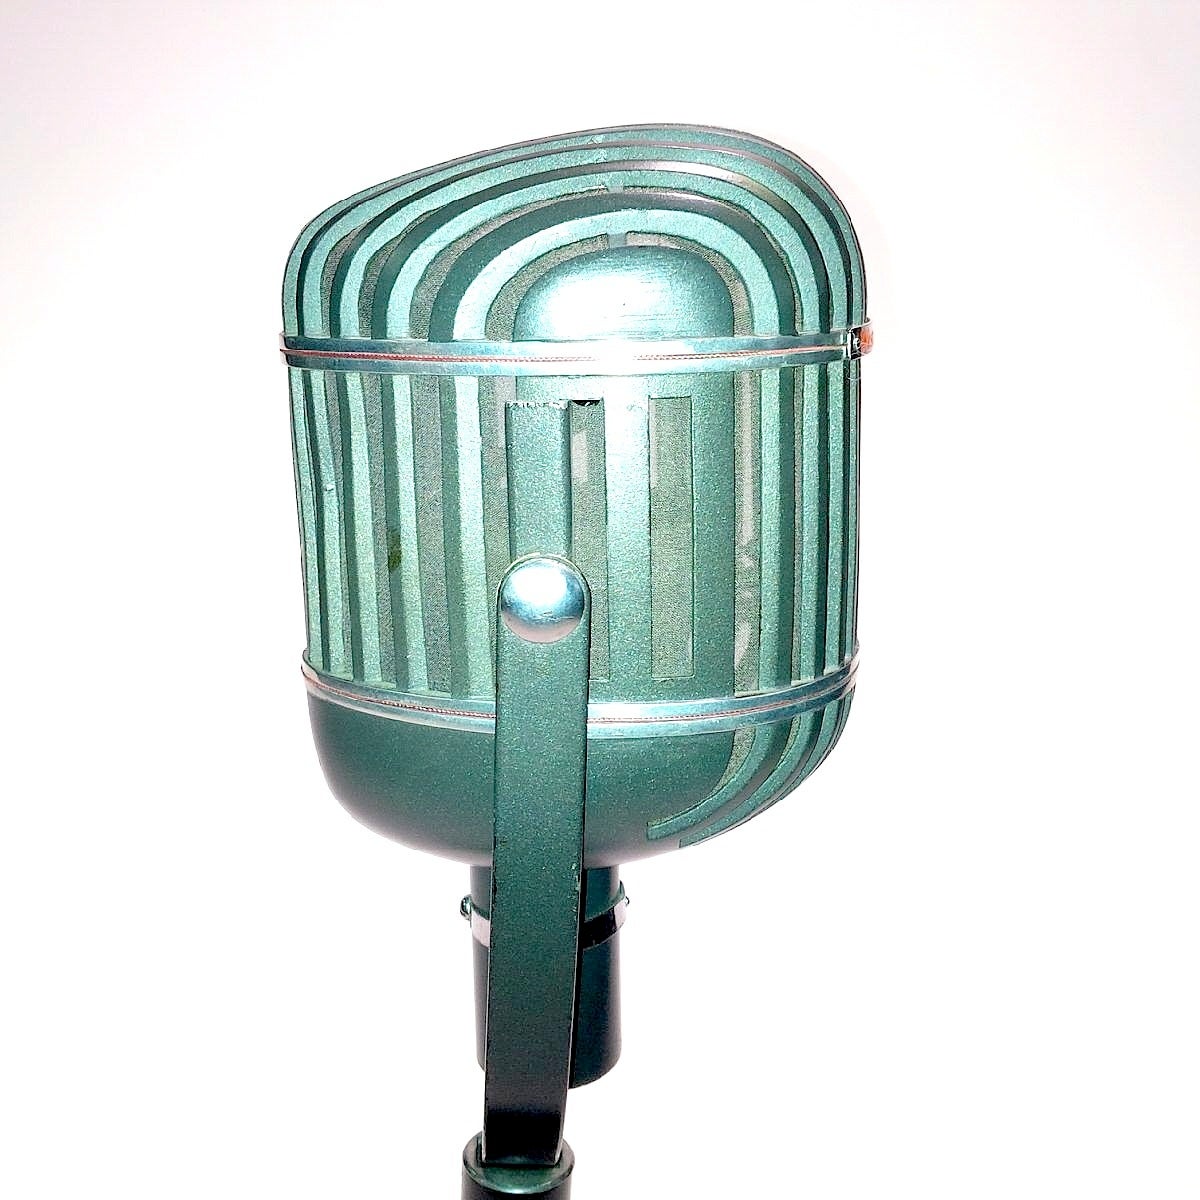 ORIGINAL
UNMOLESTED
UNRESTORED

ART DECO
RARE 
USA MADE
WESTERN ELECTRIC 
VINTAGE
Circa 1938
MAGNETIC
CARDIOID
MICROPHONE

MODEL 639B 

IN ABSOLUTE
SPECTACULAR
AS FOUND
CONDITION.

NOT EVEN CLEANED

NOT THE LATER